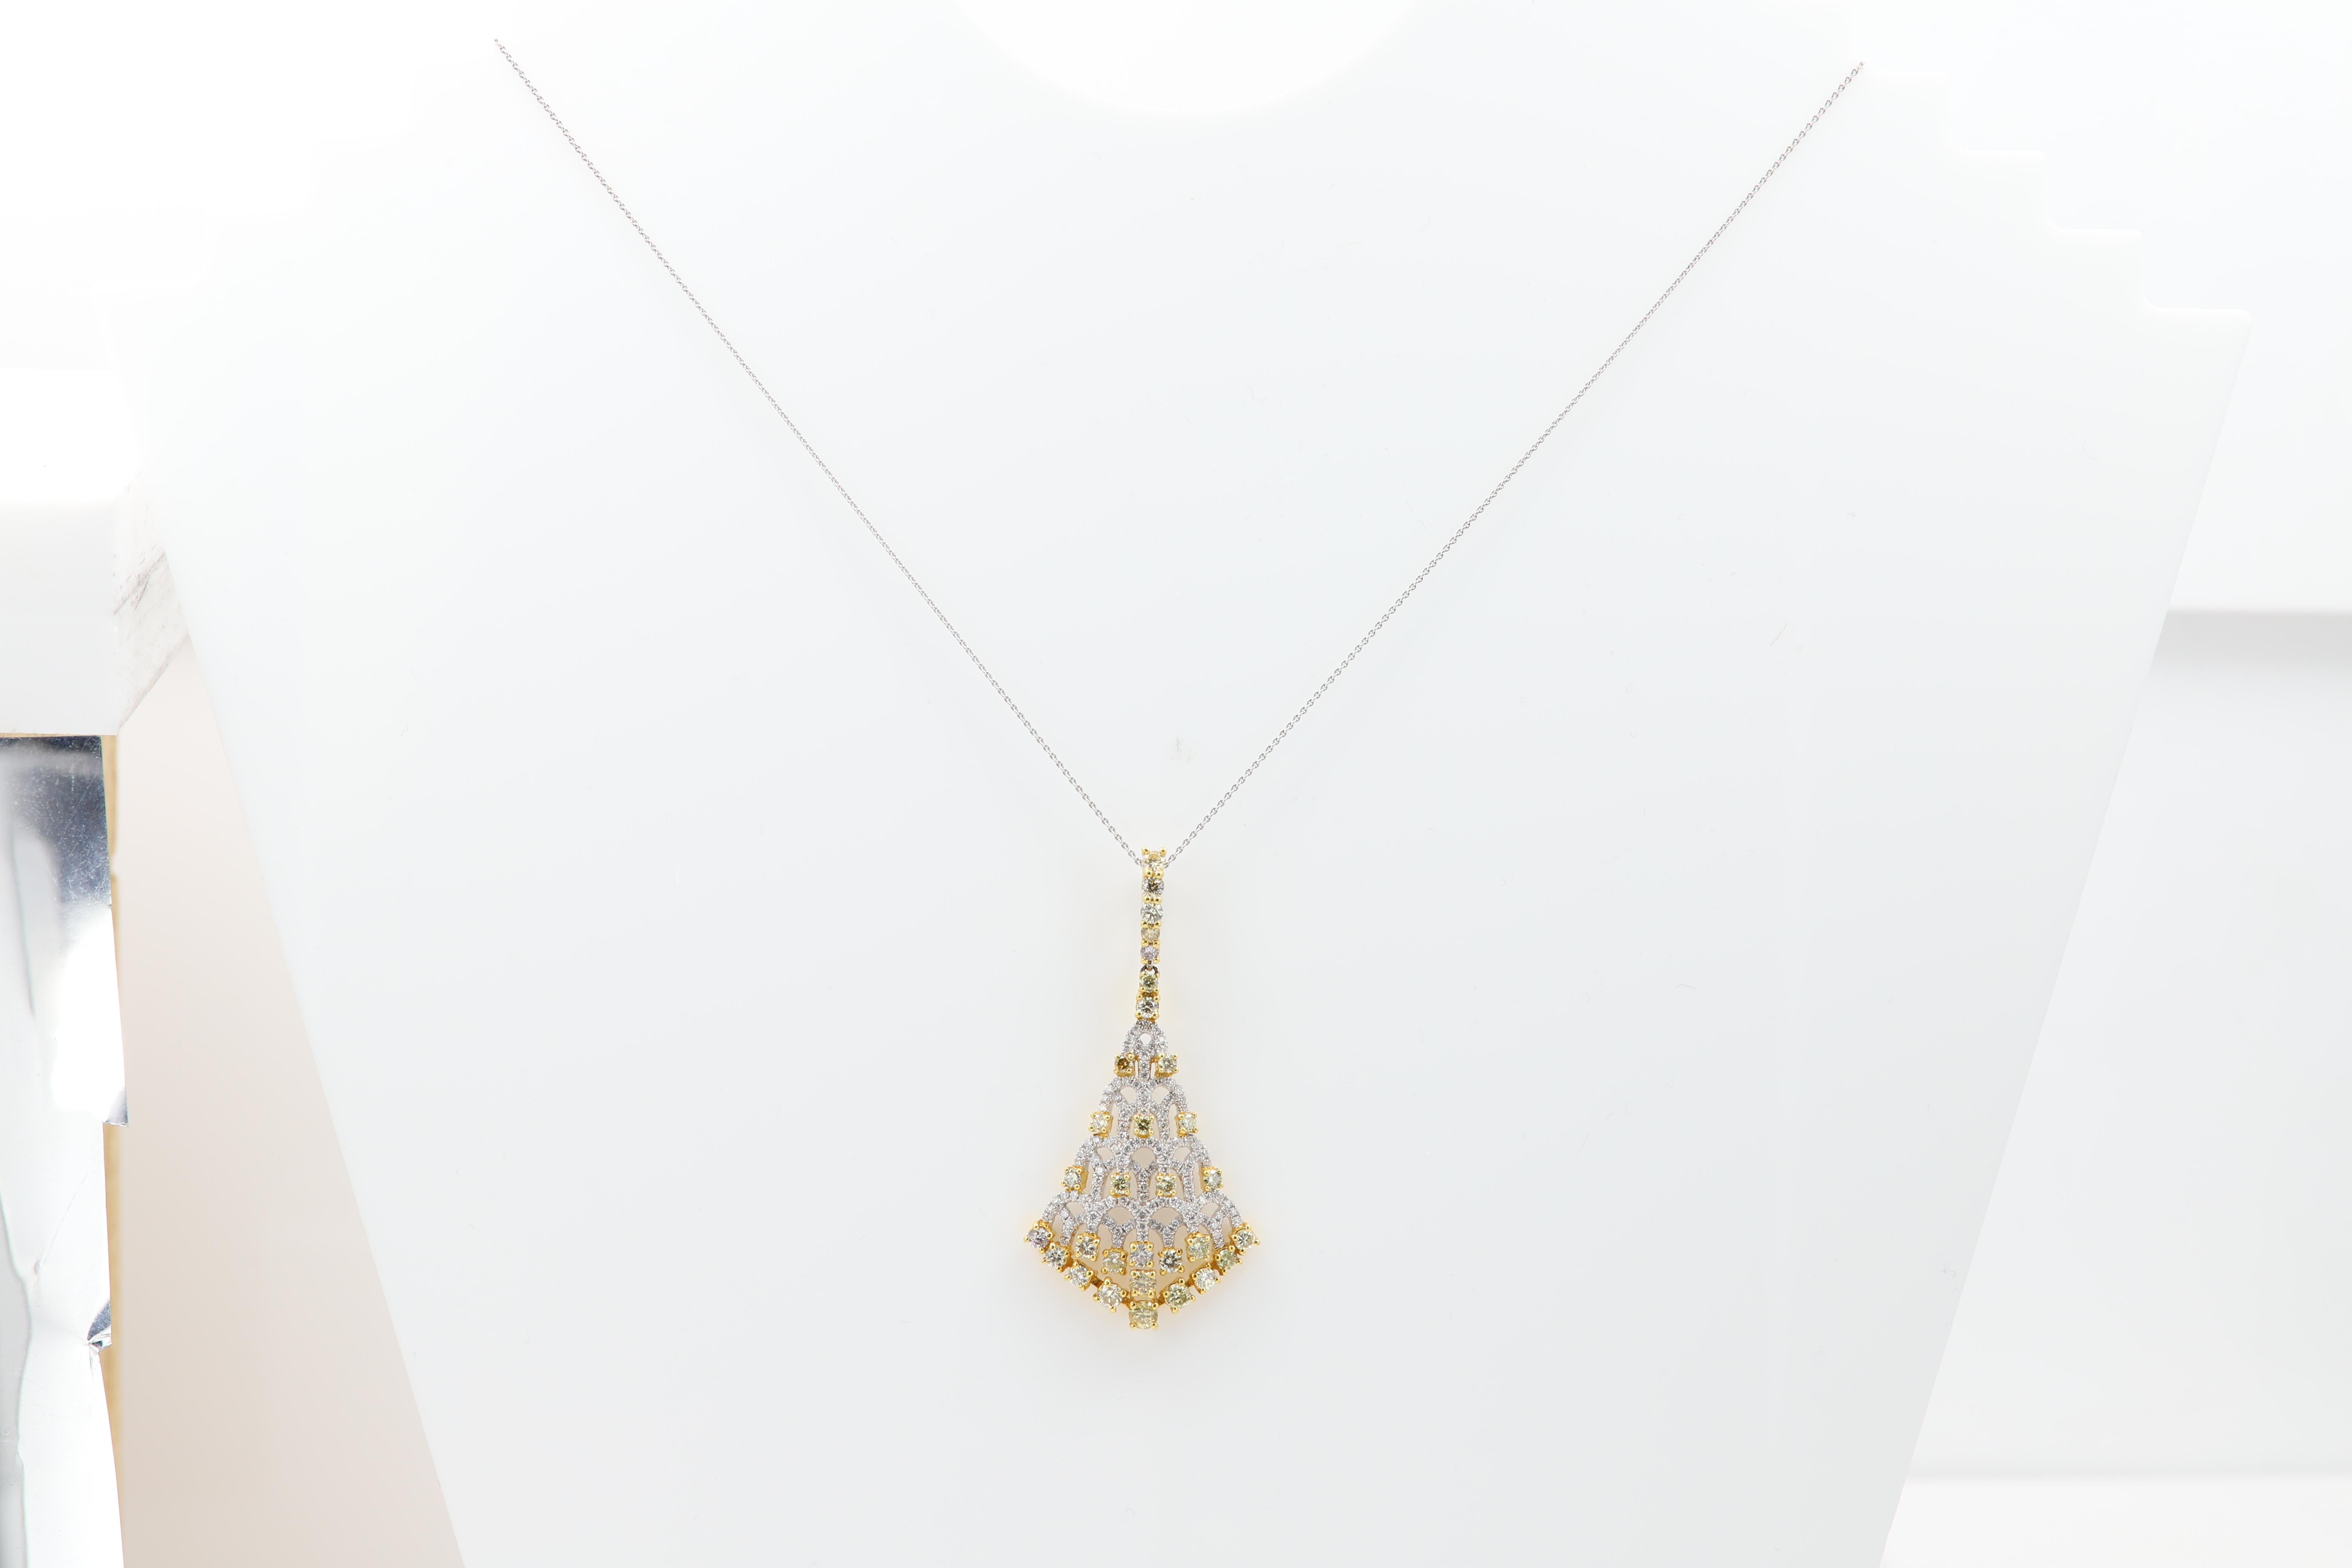 Dangle Yellow Diamond Pendant Necklace 18 Karat White and Yellow Gold  In New Condition For Sale In Brooklyn, NY